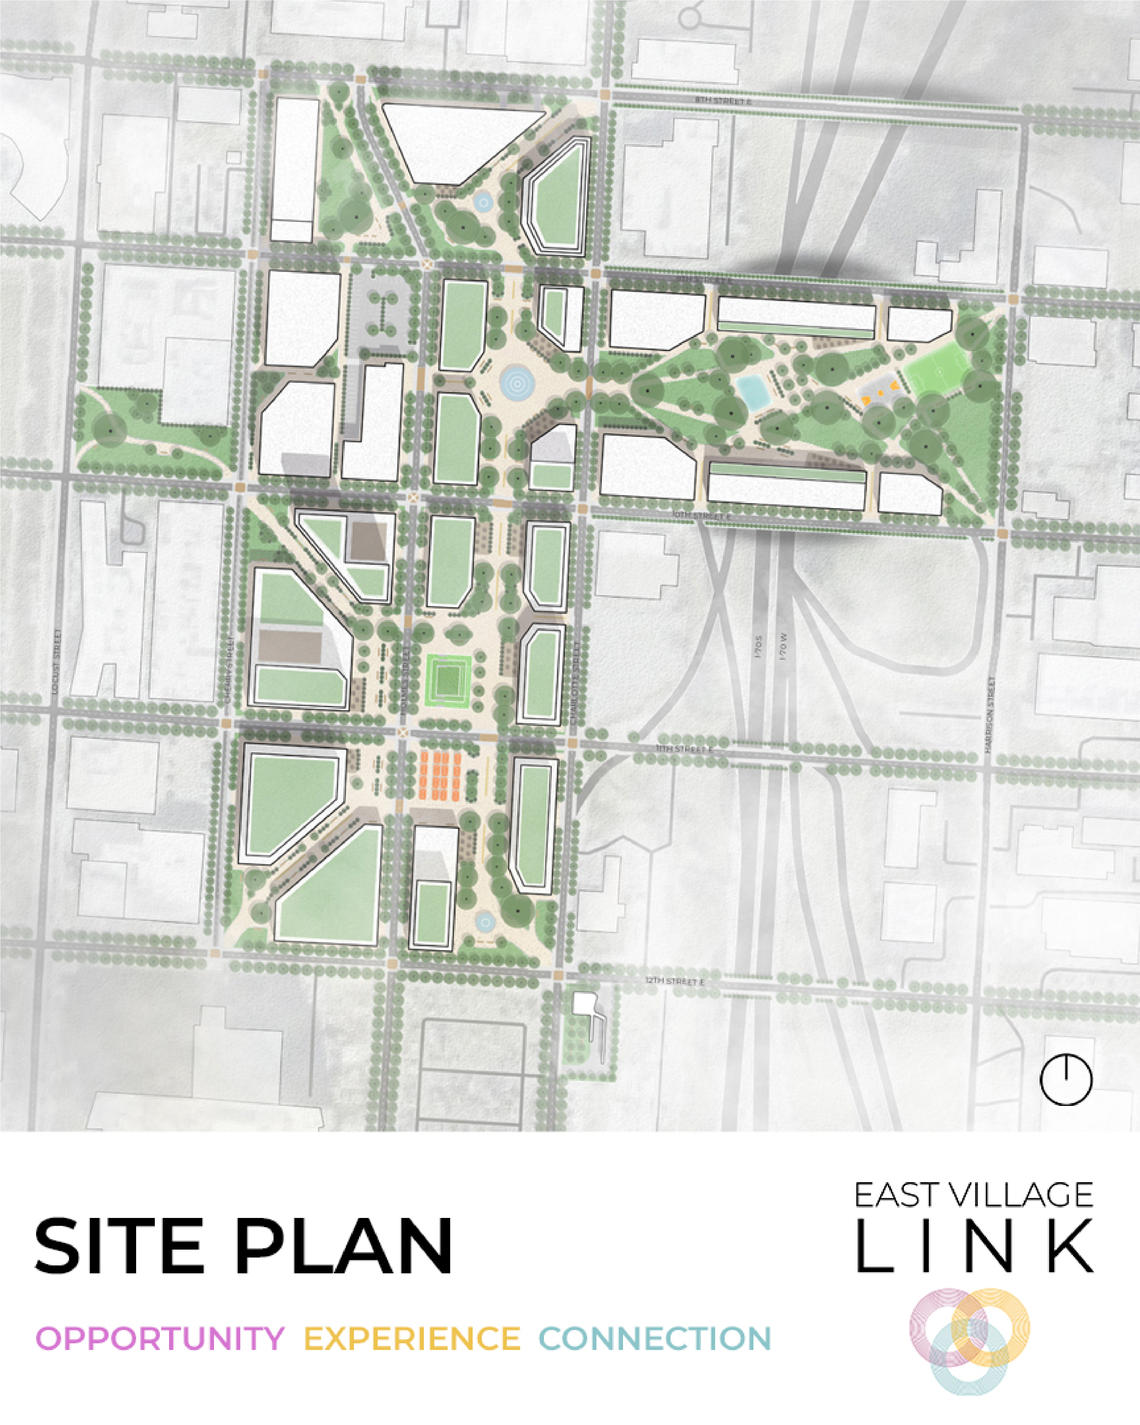 UCalgary's ULI Hines competition submission focused on connection, experience and opportunity in Kansas City's downtown core.